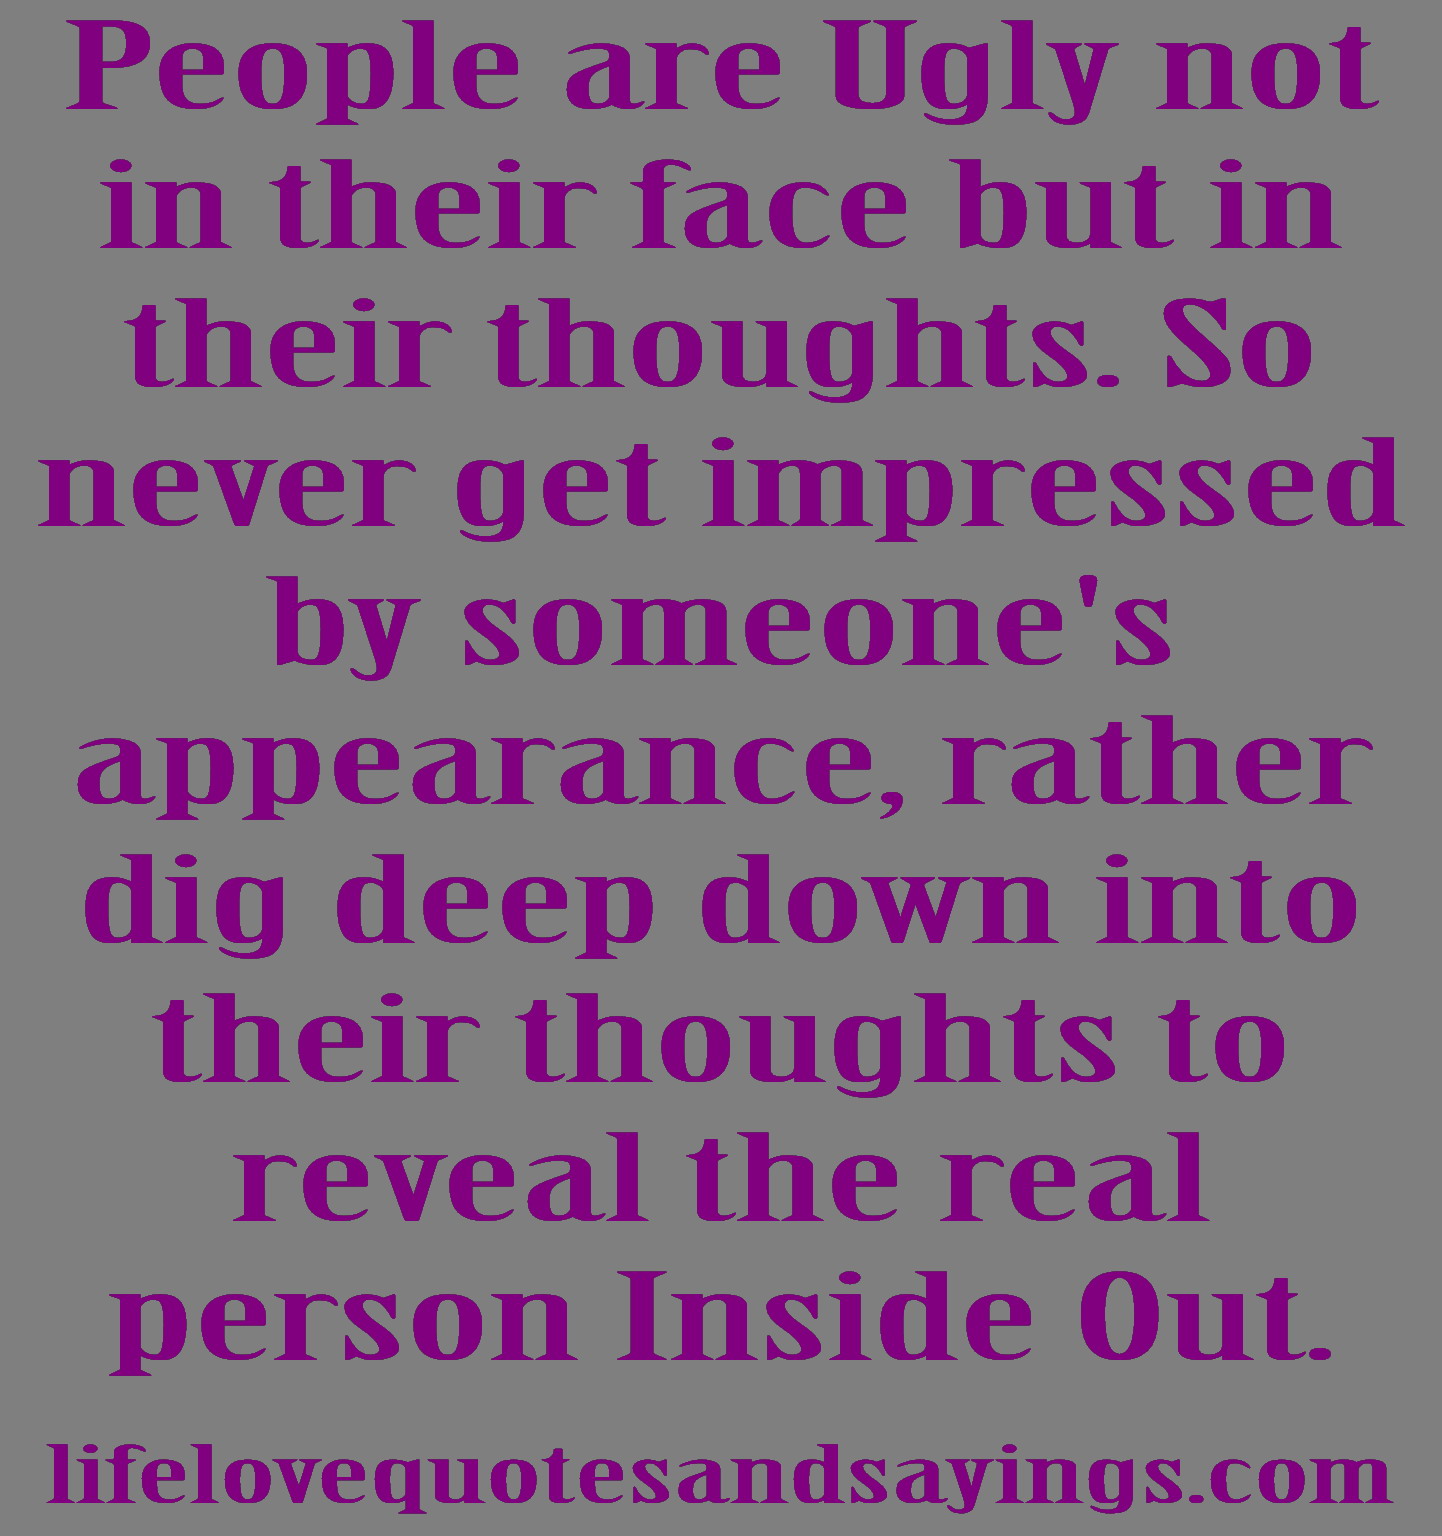 Quotes About Ugly People. QuotesGram